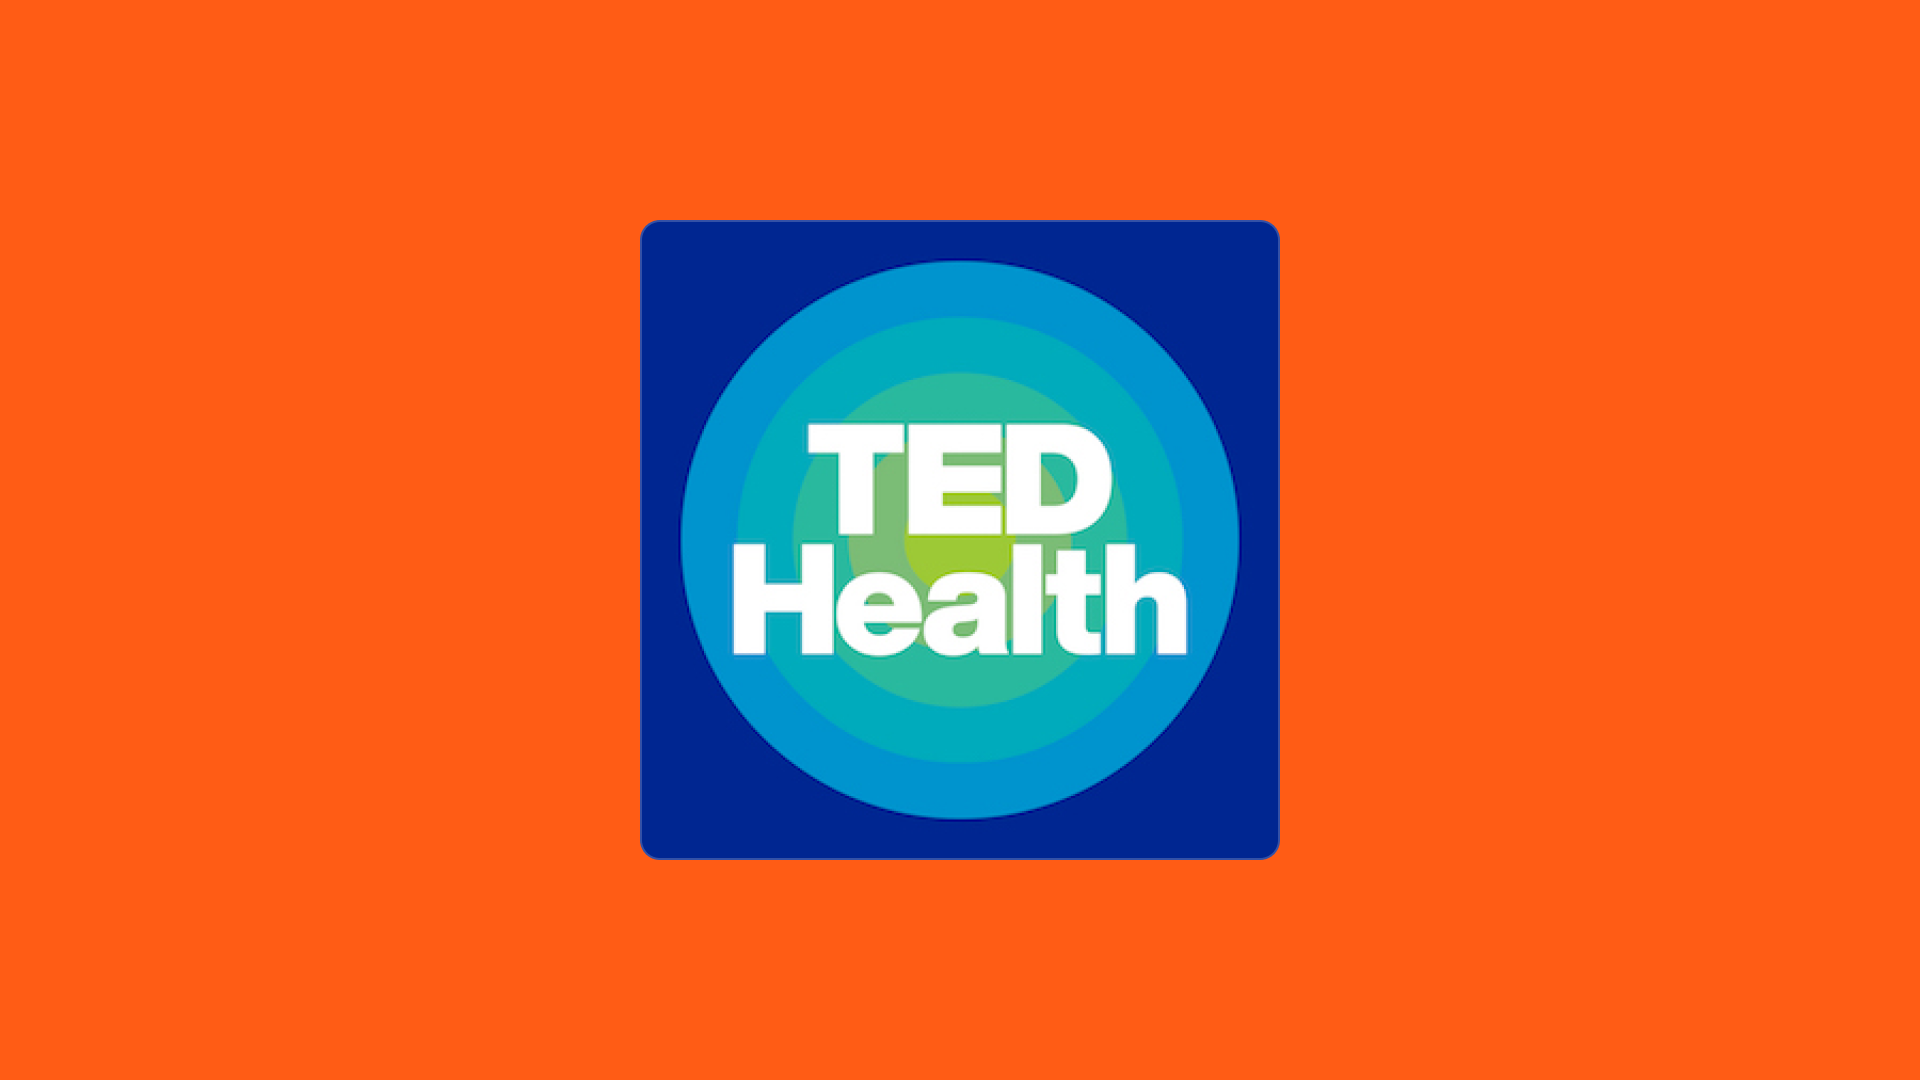 TED Health